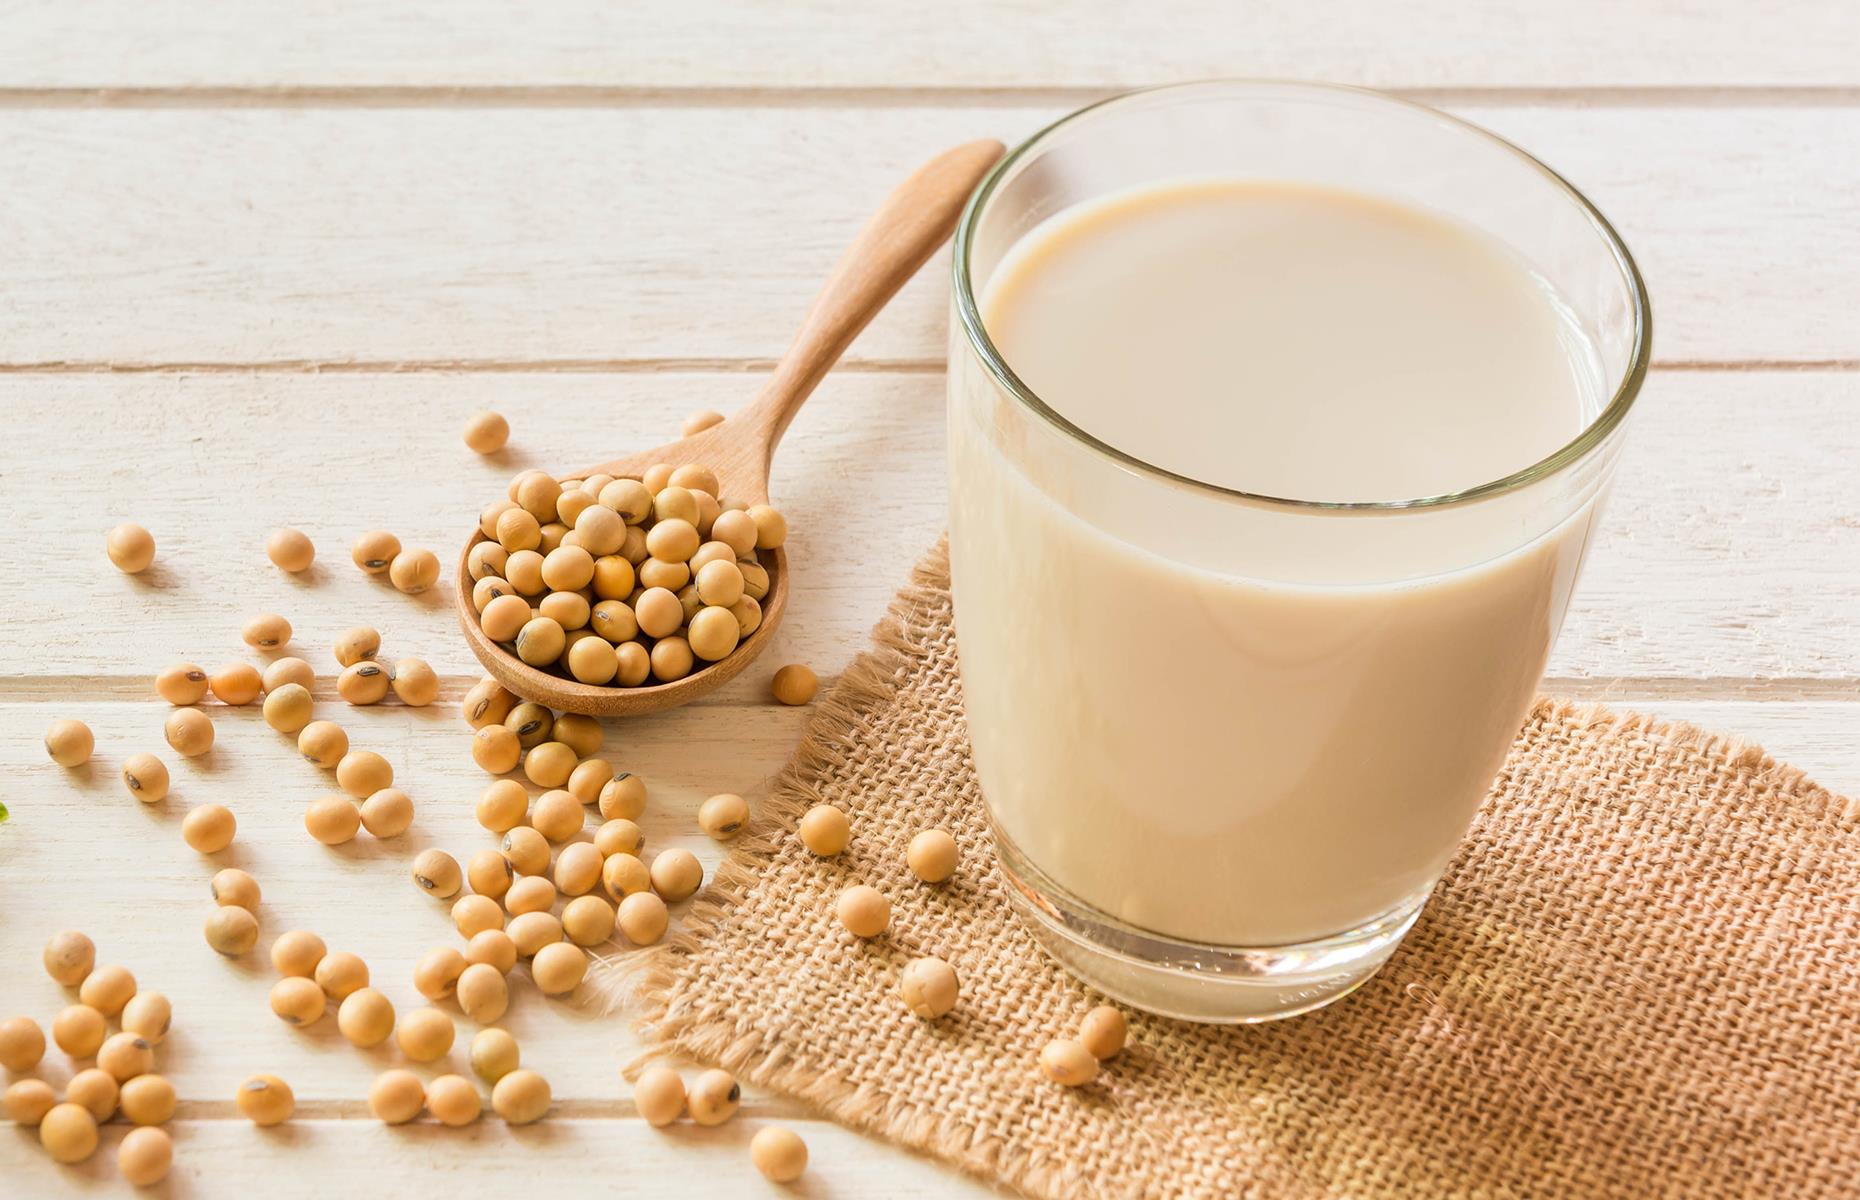 <p>You might think that soya milk – a popular substitute for dairy milk – is an uber-modern health food, but it actually has ancient origins. It's said that the cows' milk alternative originated with the ancient Chinese, with cultures here consuming the beverage <a href="https://www.sciencedirect.com/topics/medicine-and-dentistry/soybean-milk">as early as AD 25–220</a>.</p>